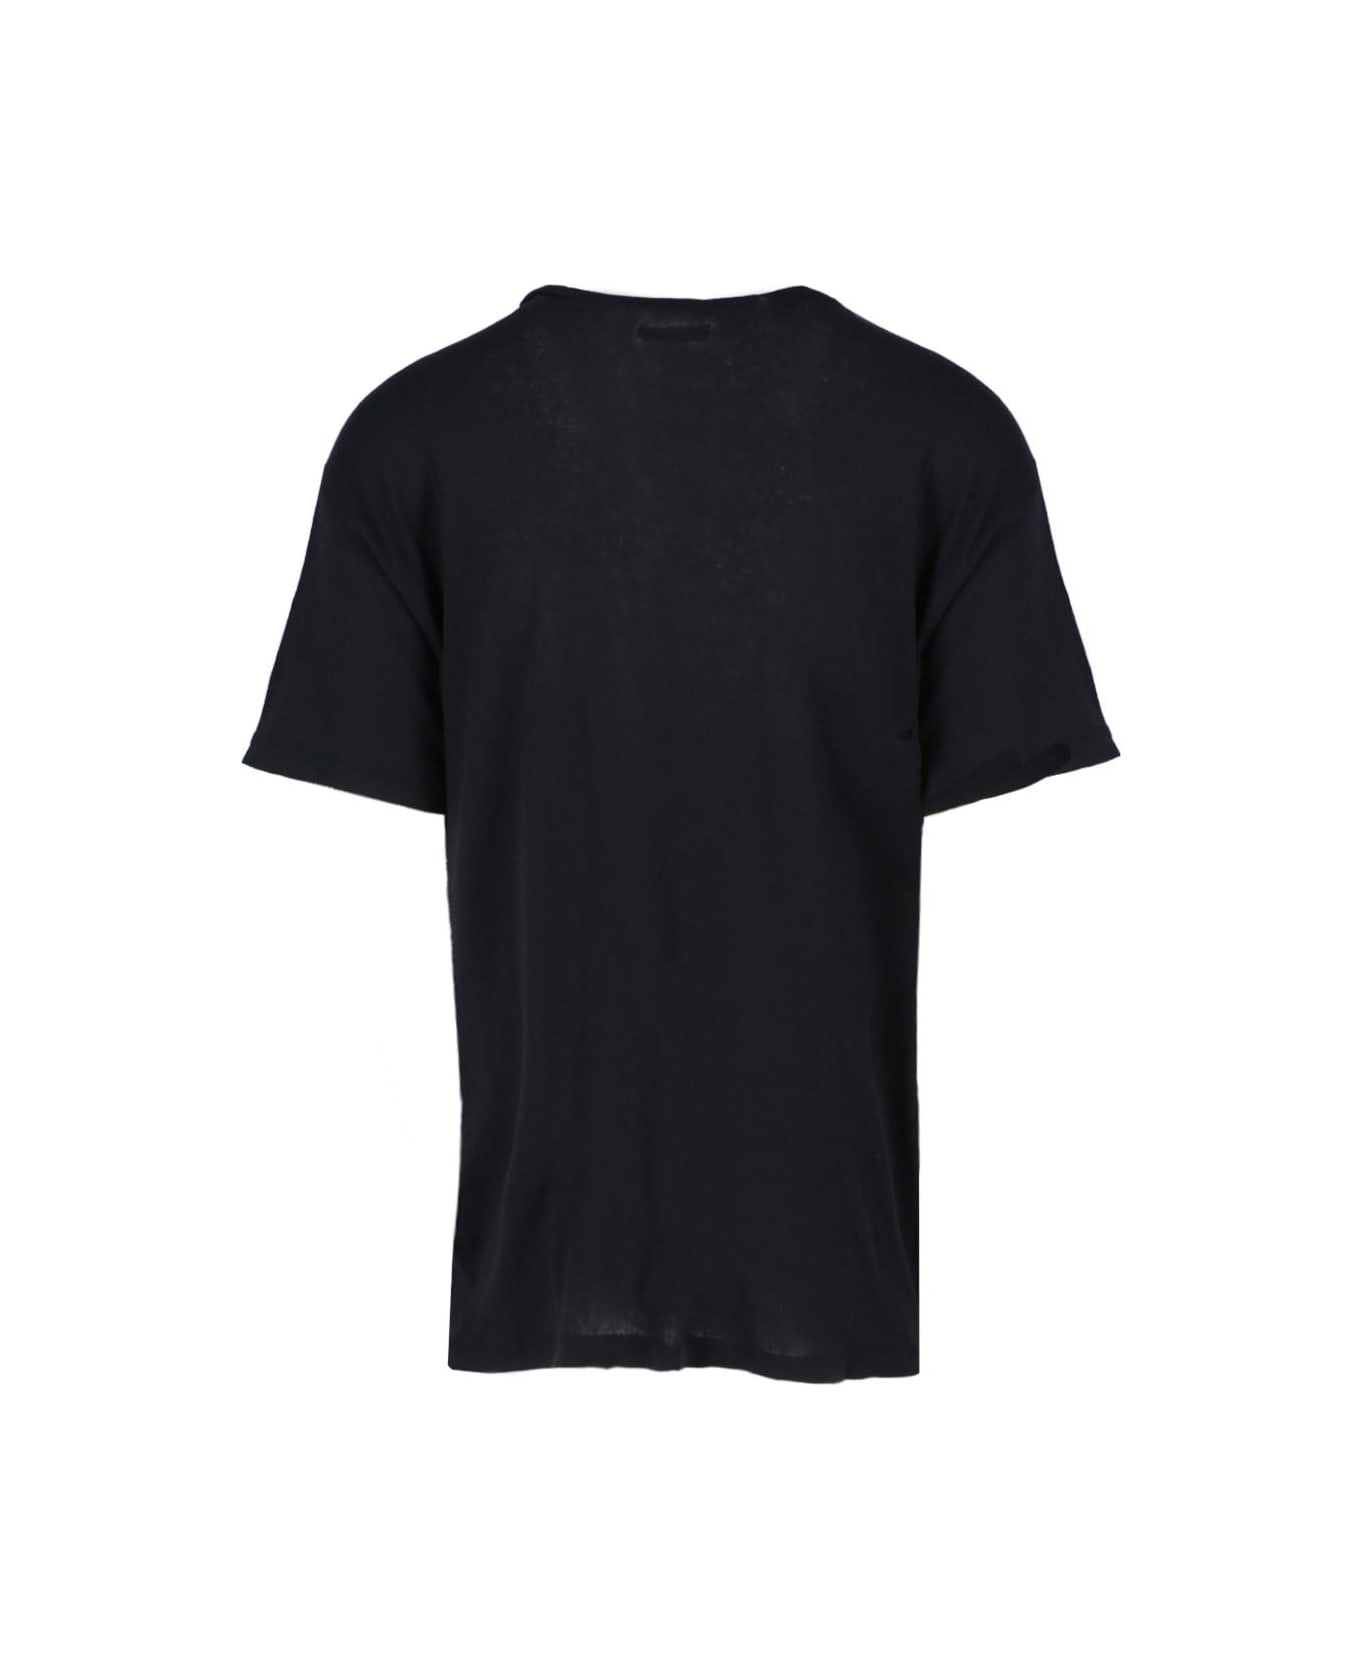 ERL 'baby' T-shirt - Faded Black シャツ